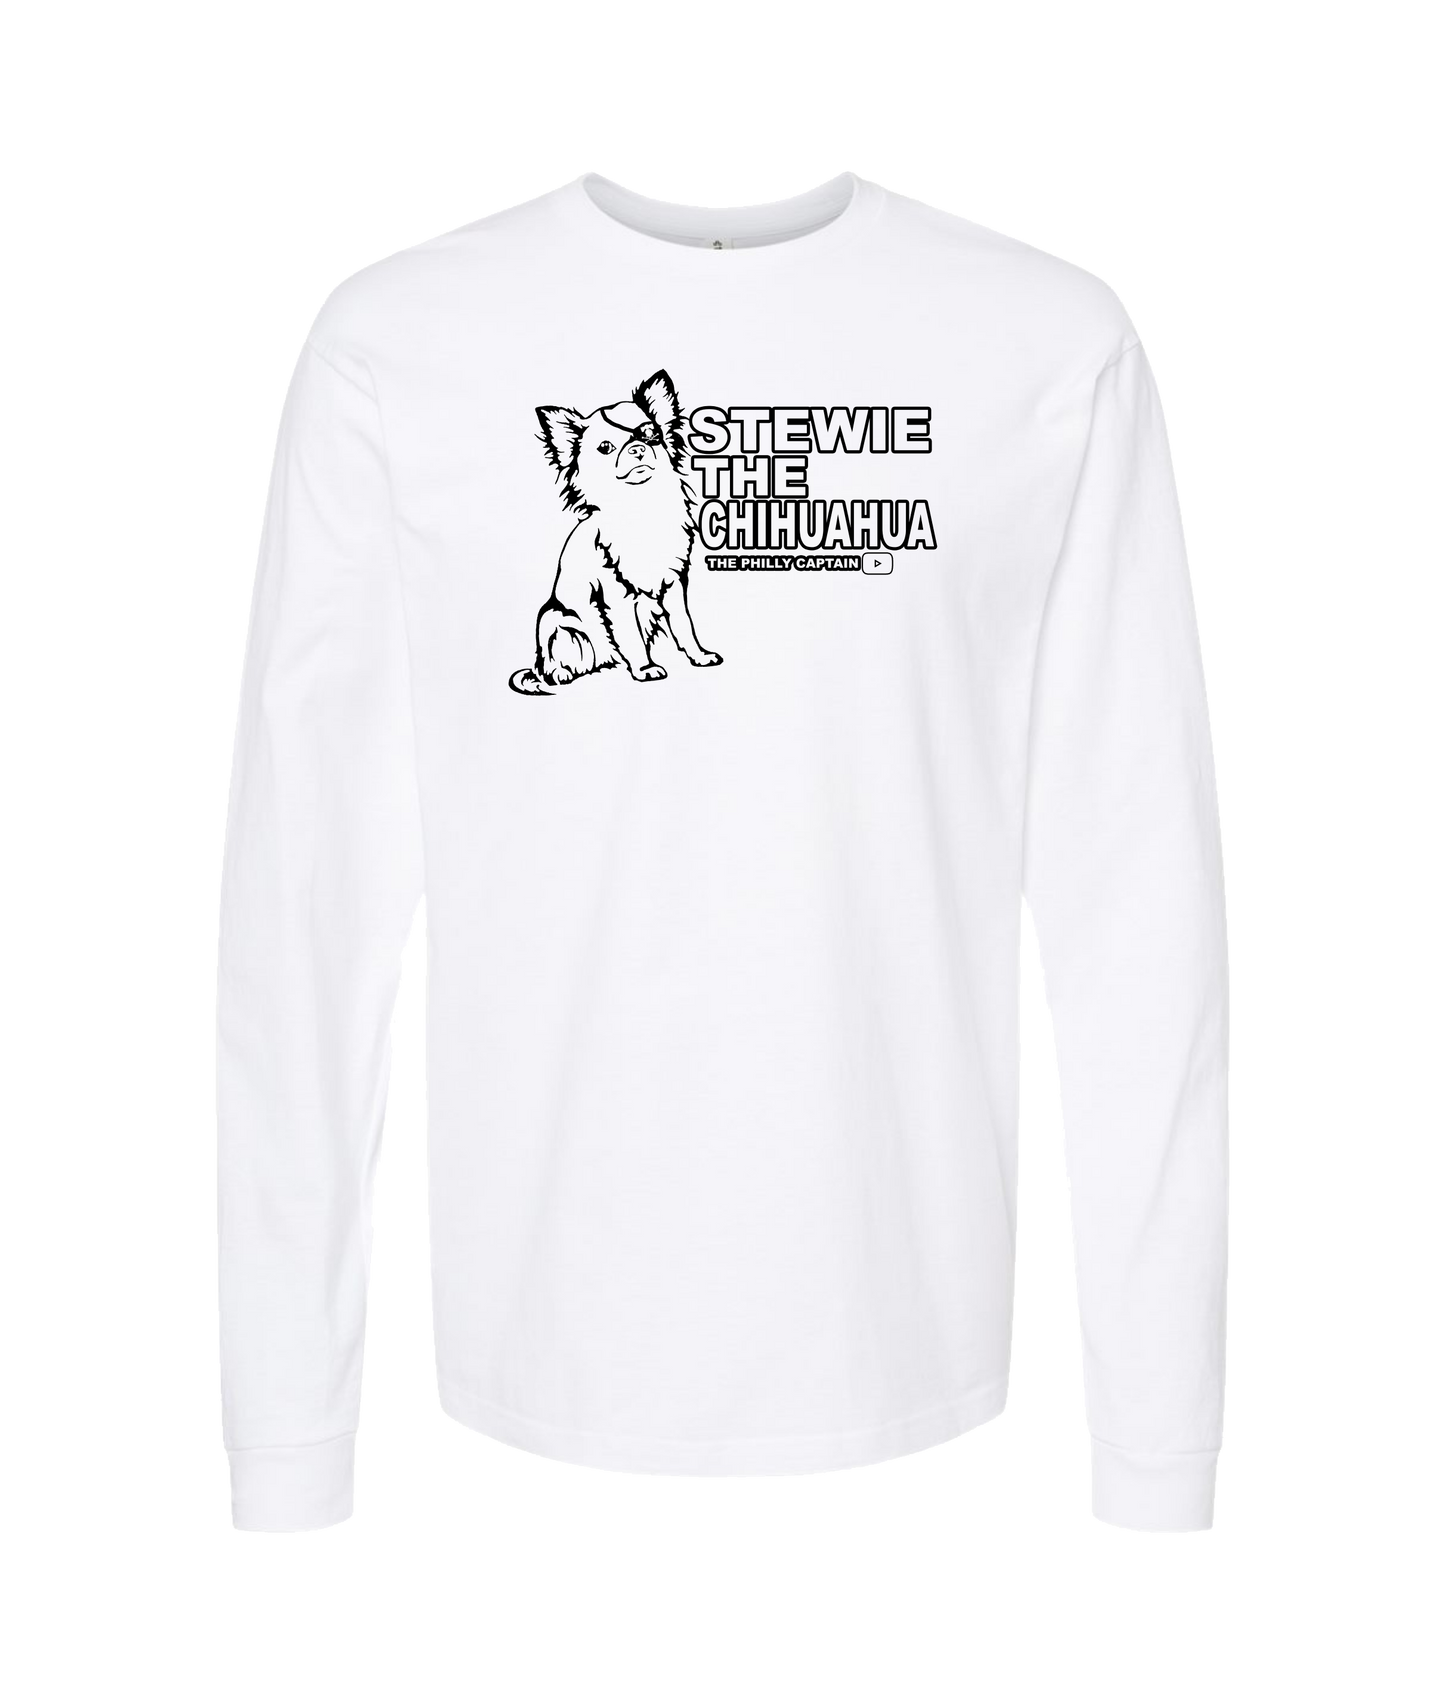 The Philly Captain's Merch is Fire - Stewie the Chihuahua - White Long Sleeve T